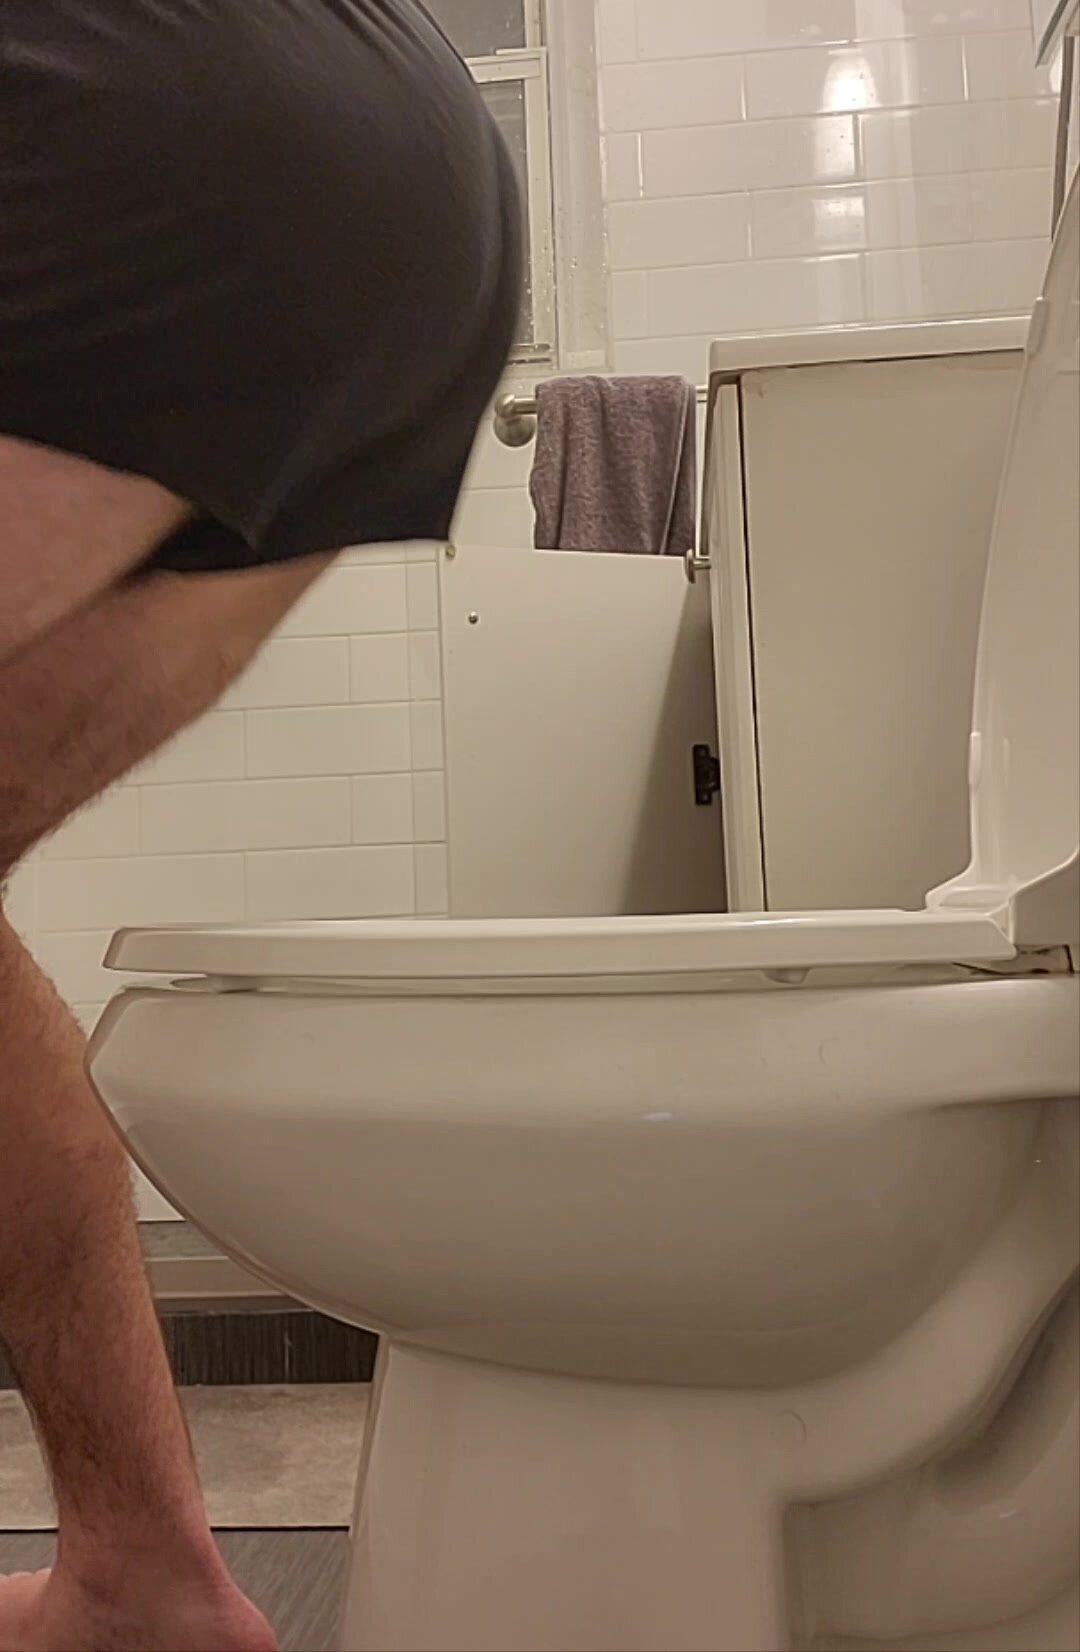 Yet another toilet poop (side view) FAIL!